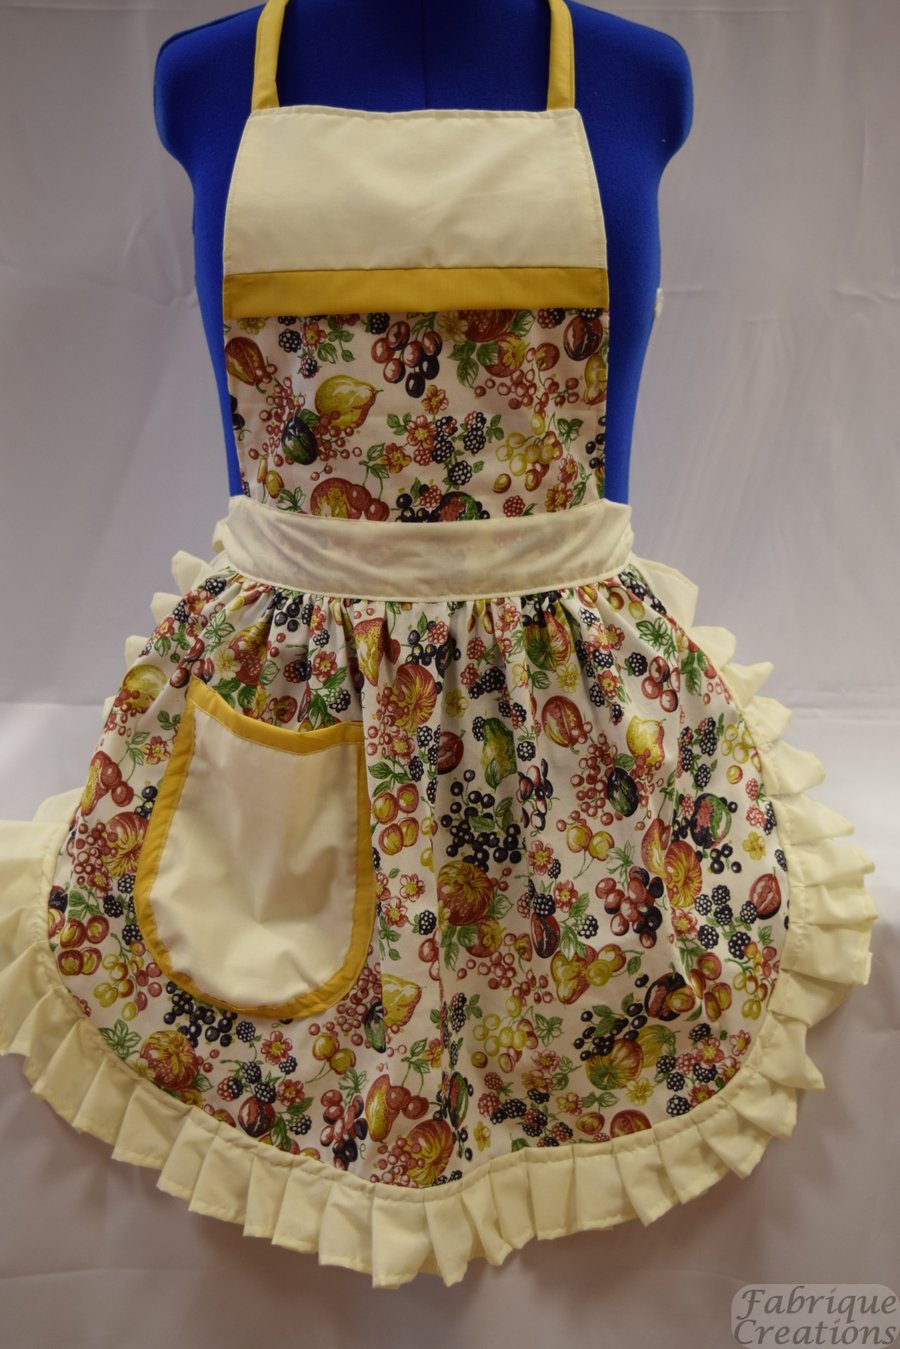 Vintage 50s Style Full Apron Pinny - Summer Fruits on Cream